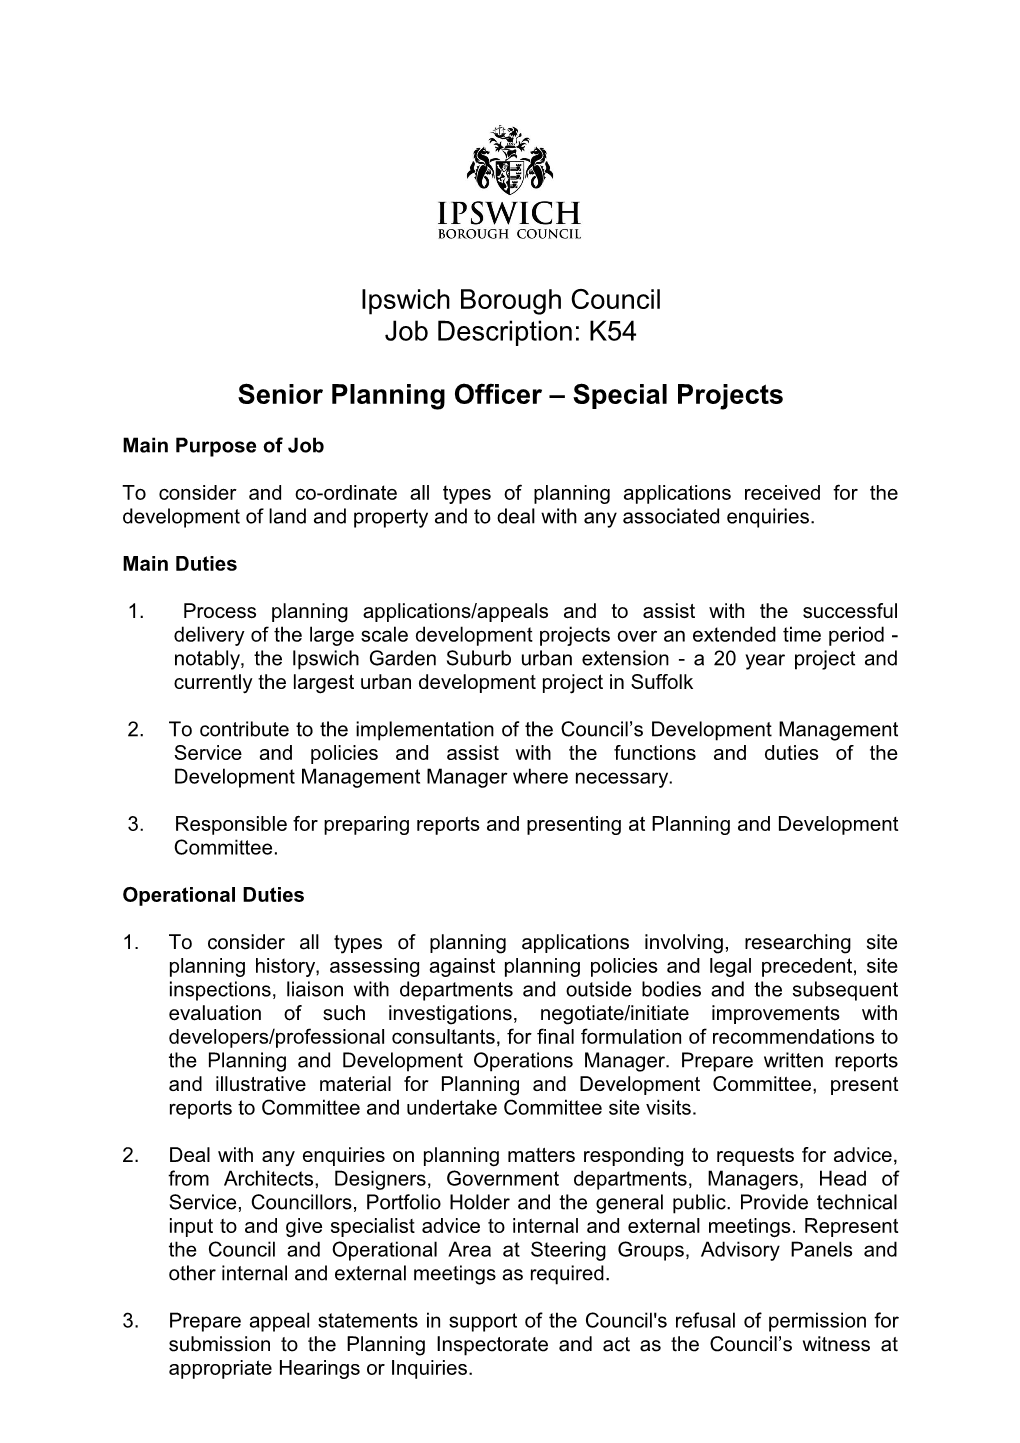 RE:Senior Planning Officer Special Projects Post Ref: 2058